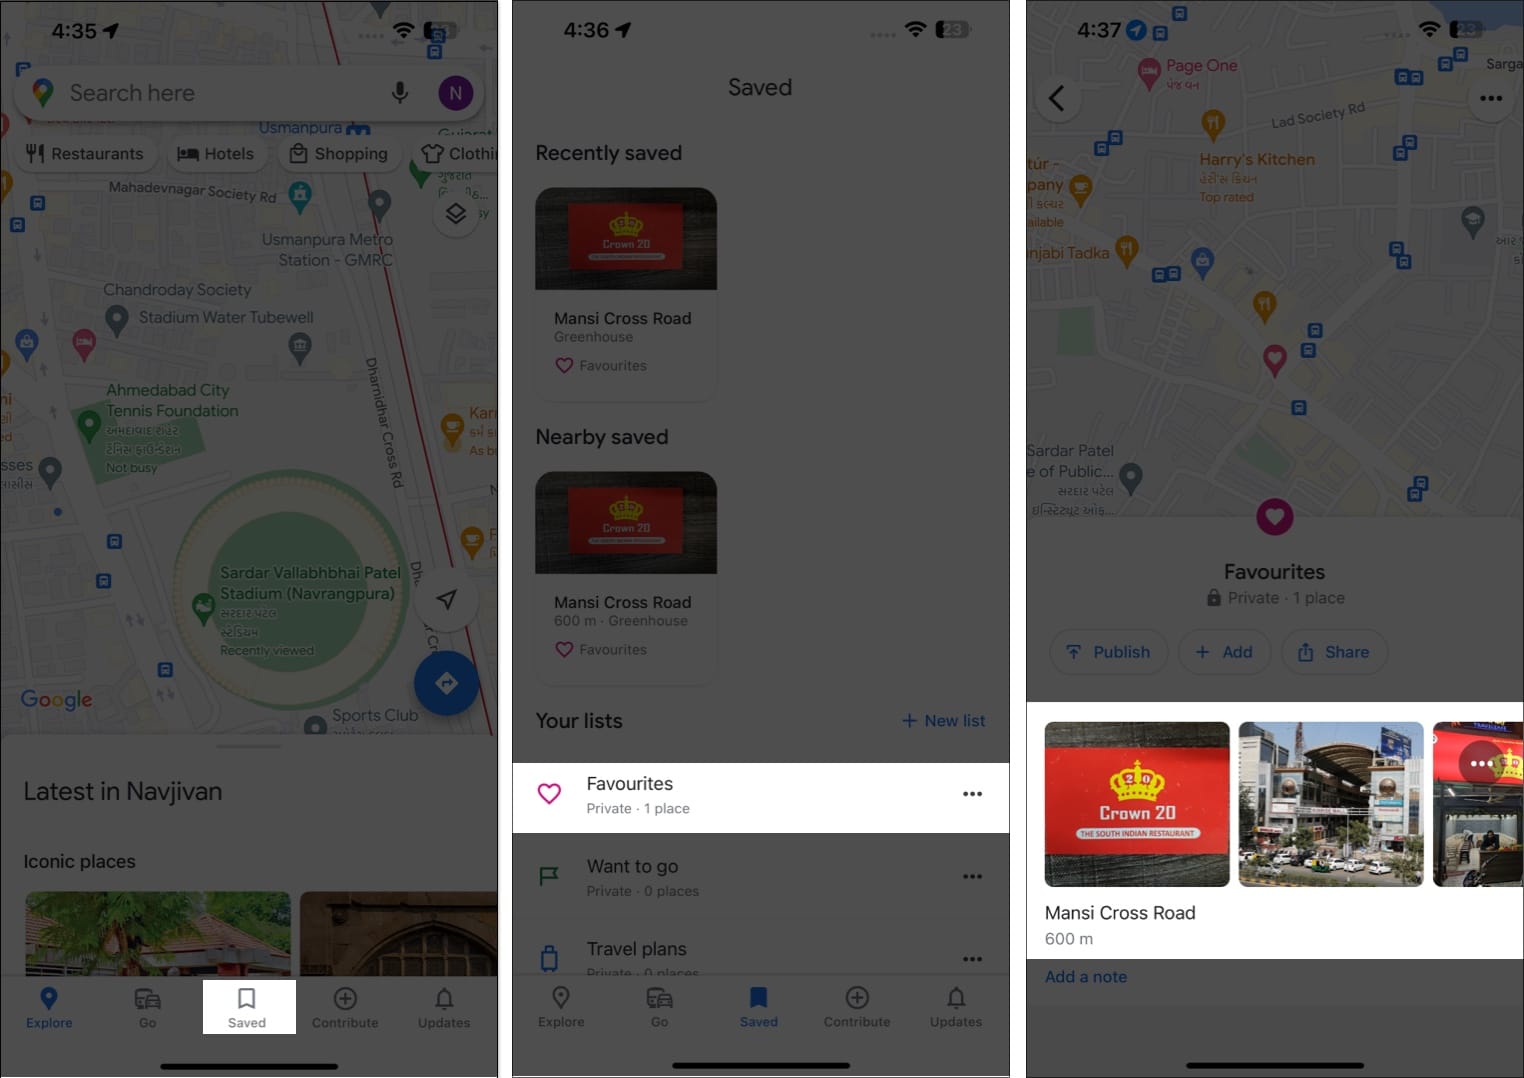 Access saved menu, select favorites, choose a location in google maps